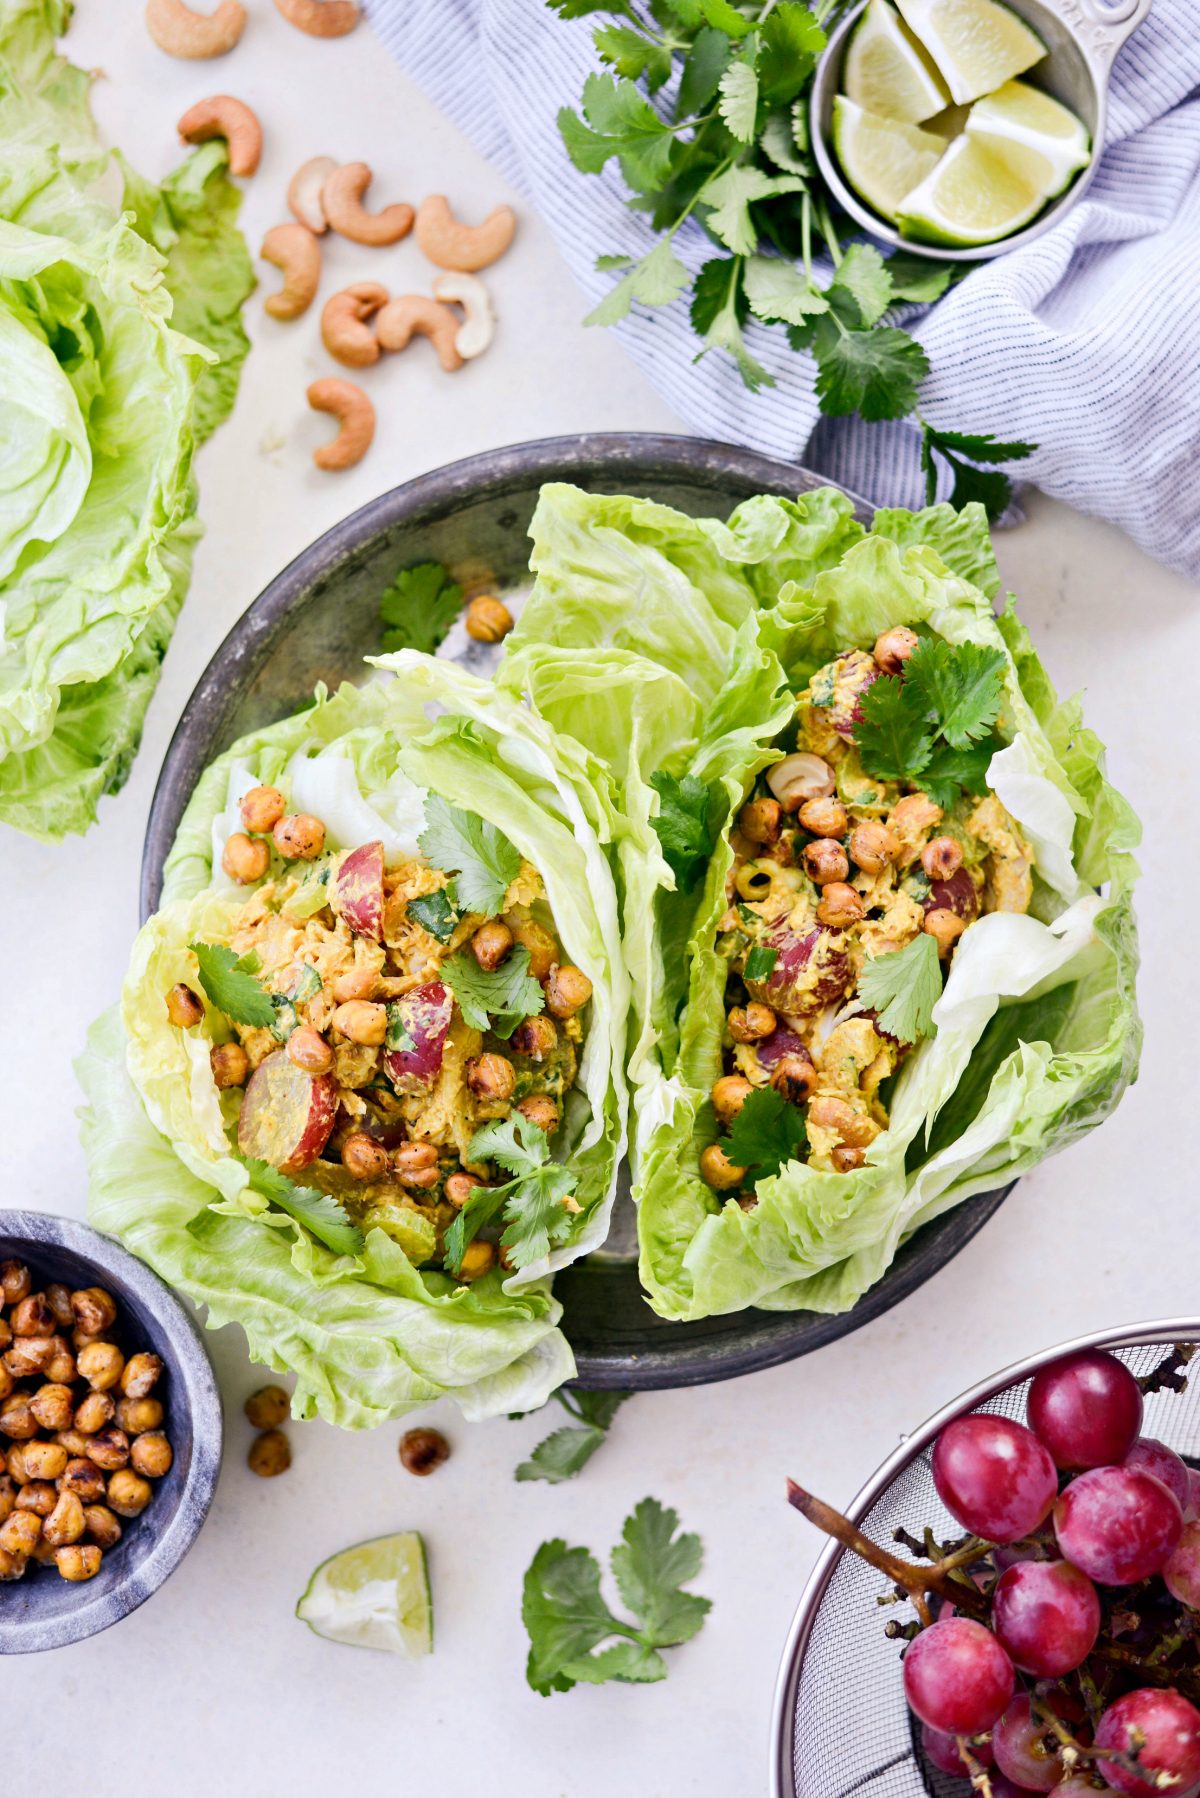 serve on a bed of lettuce, in a lettuce or more traditional wrap.